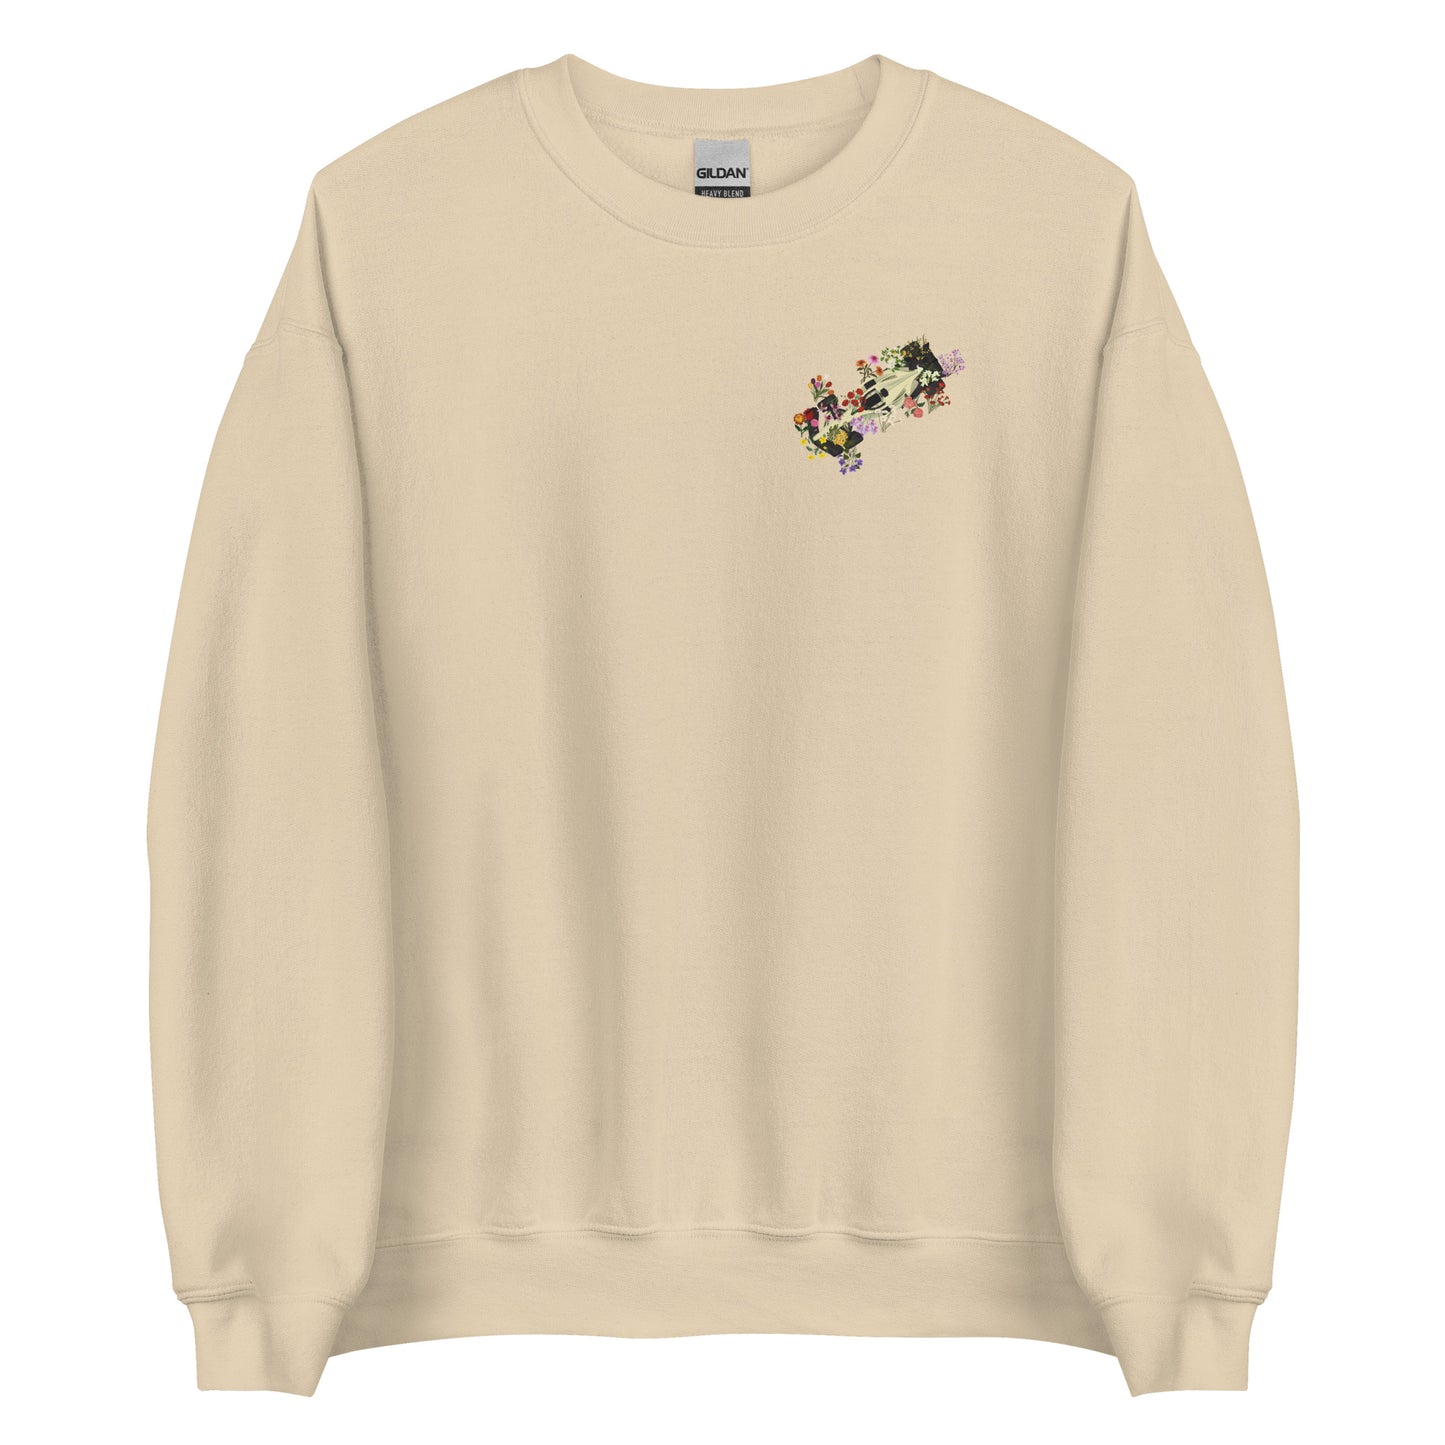 F1 Global Floral Crew Neck